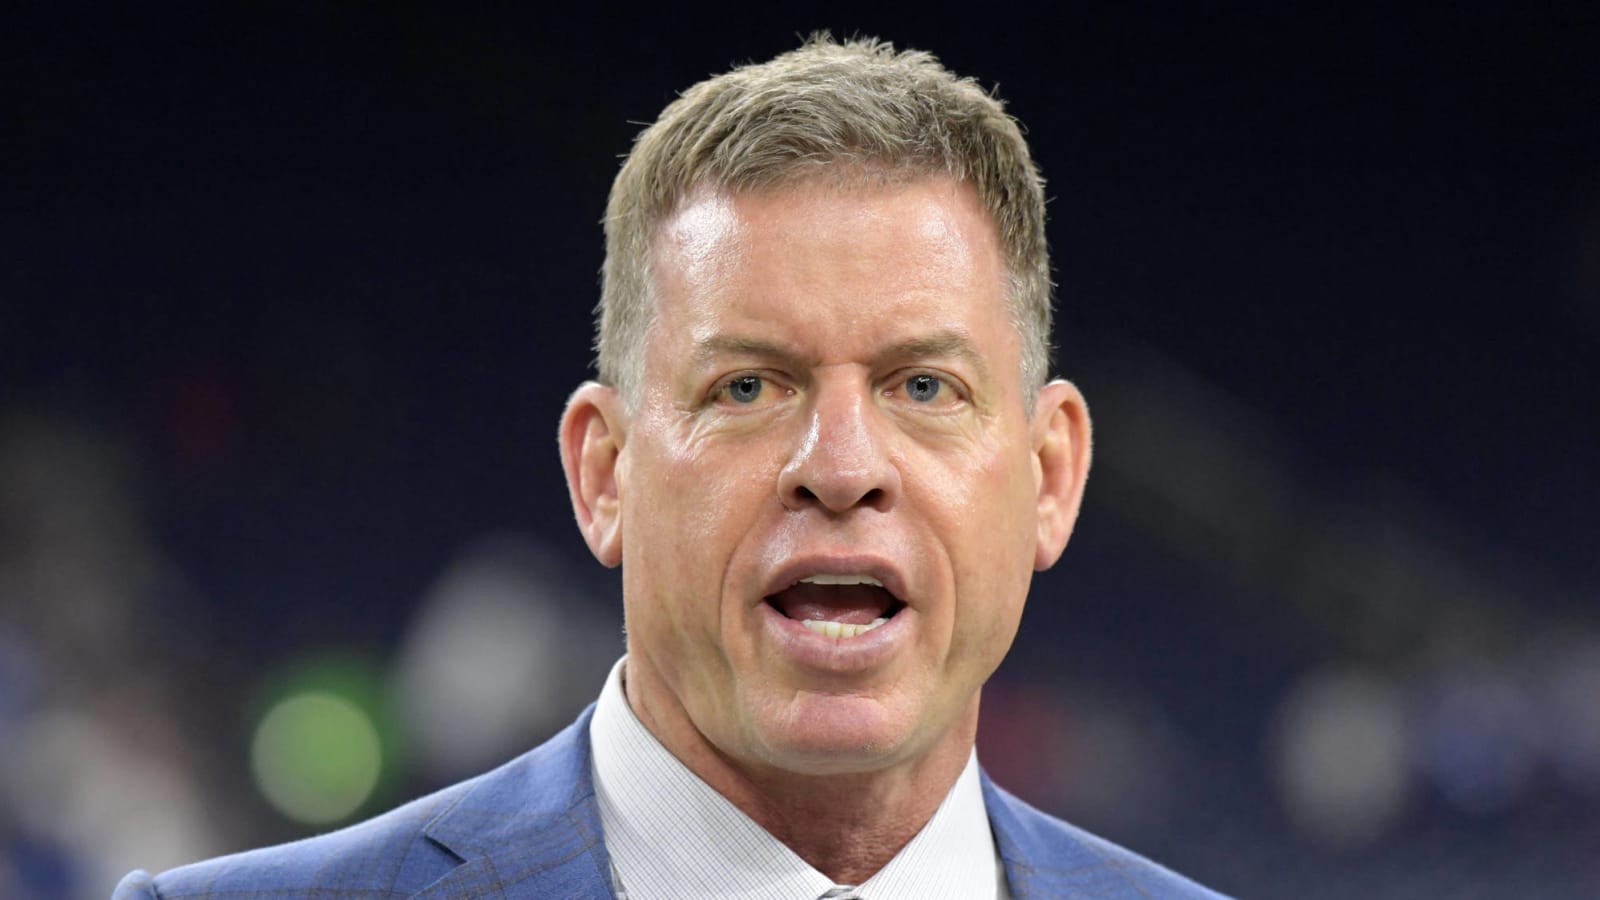 Troy Aikman has must-read take on Tom Brady comments